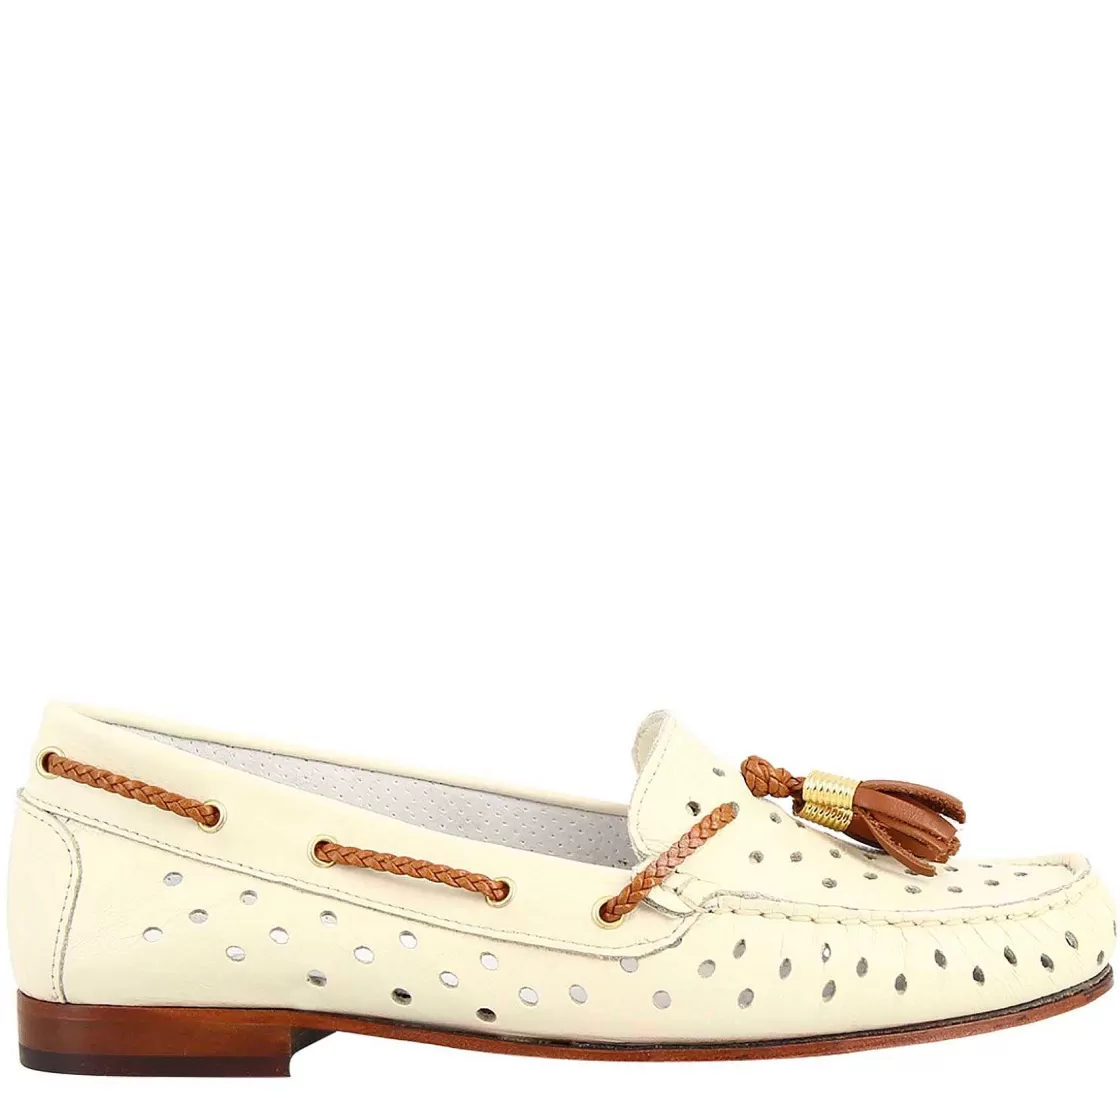 Leonardo Classic Women'S Loafers Handmade In Cream White Perforated Leather Cheap